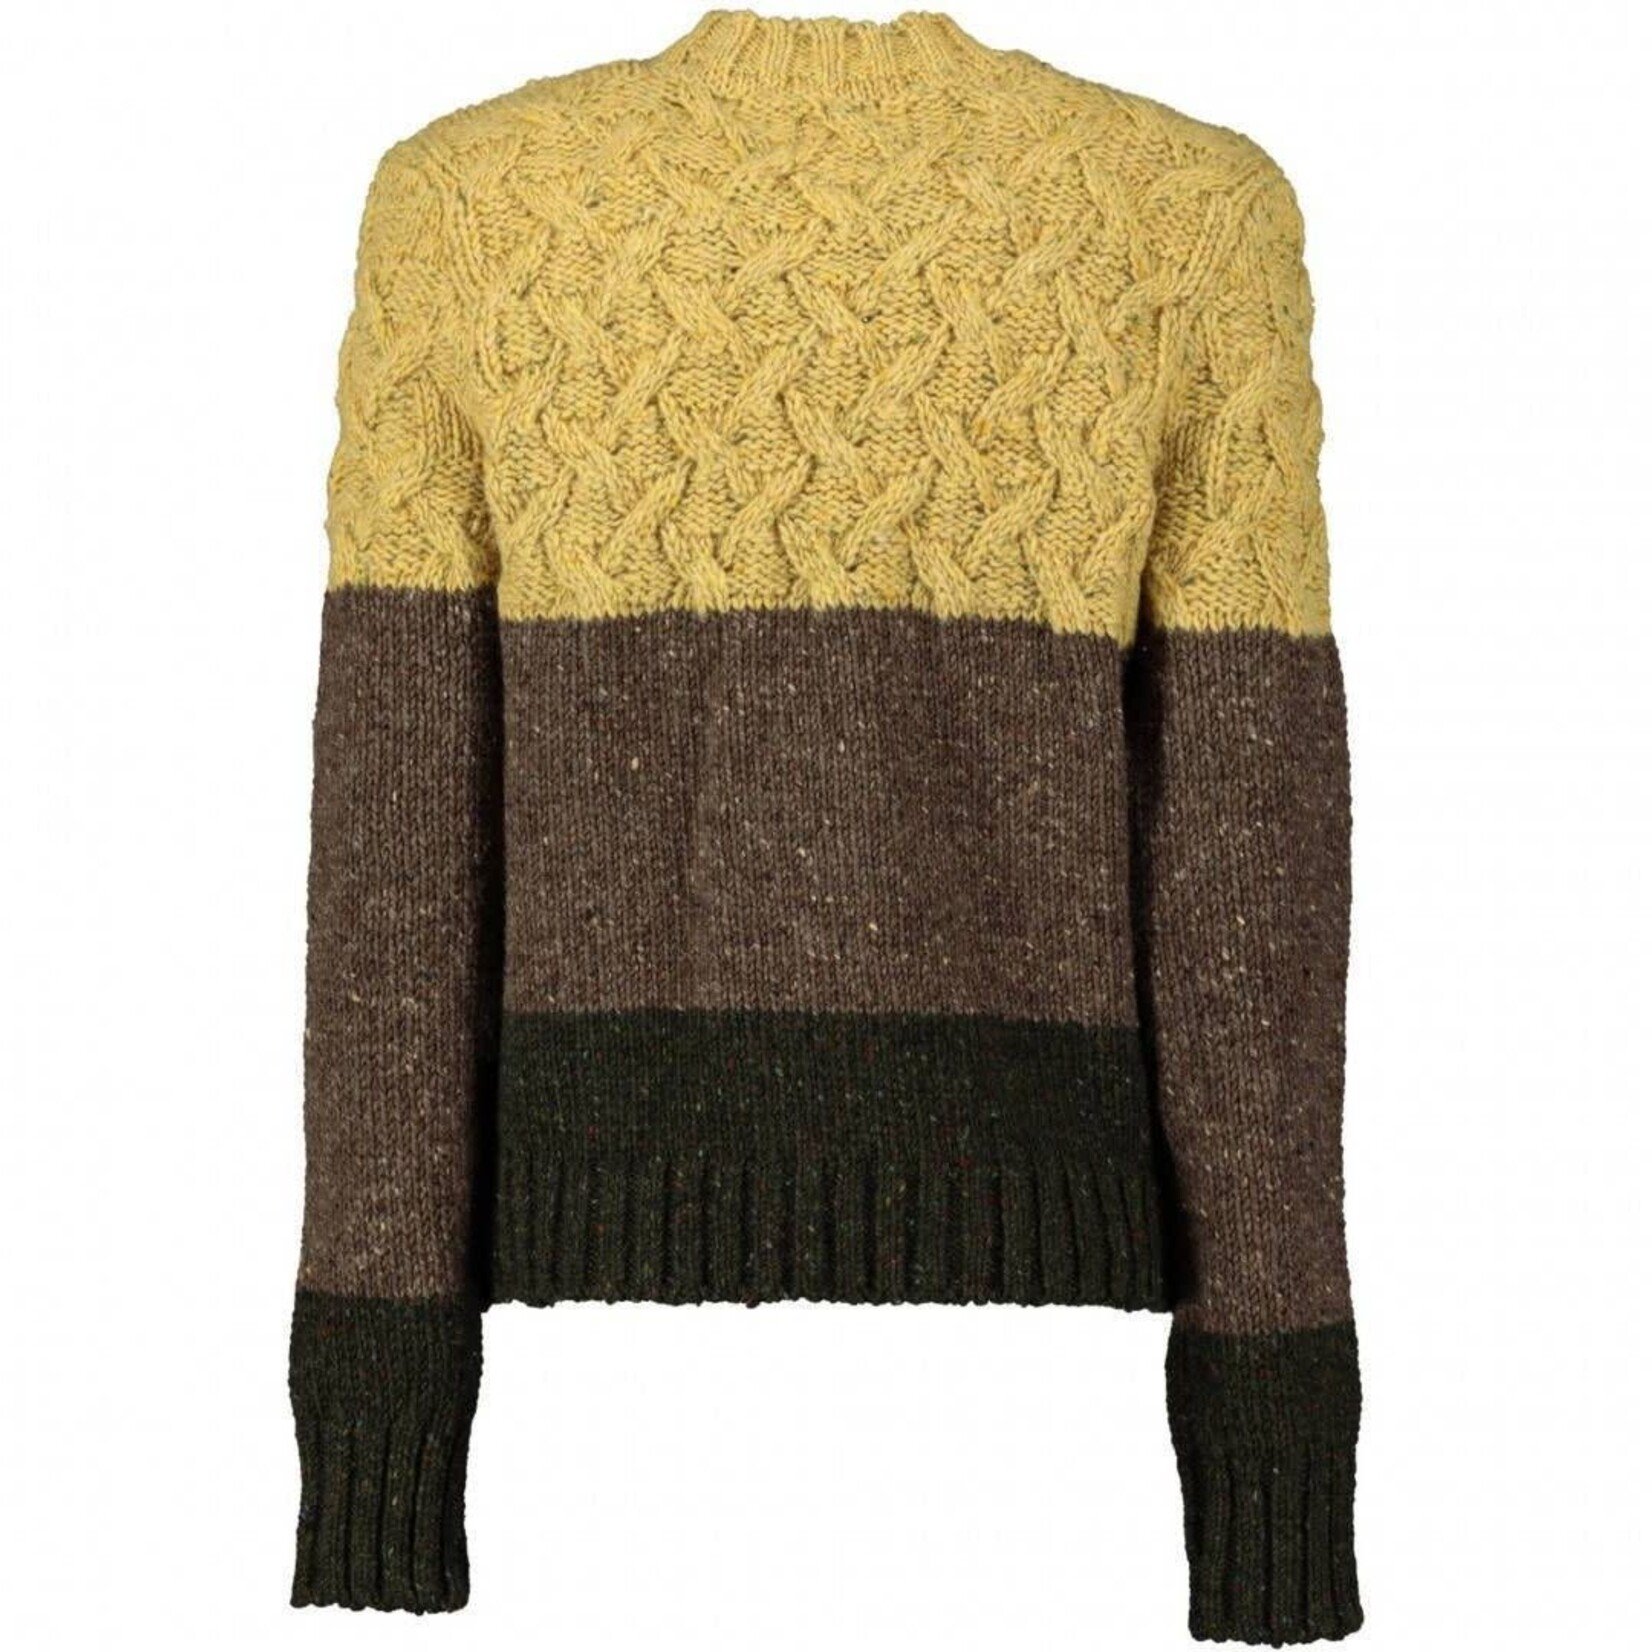 McConnell Woolen Mills 3-Color Sweater Yellow/Green: